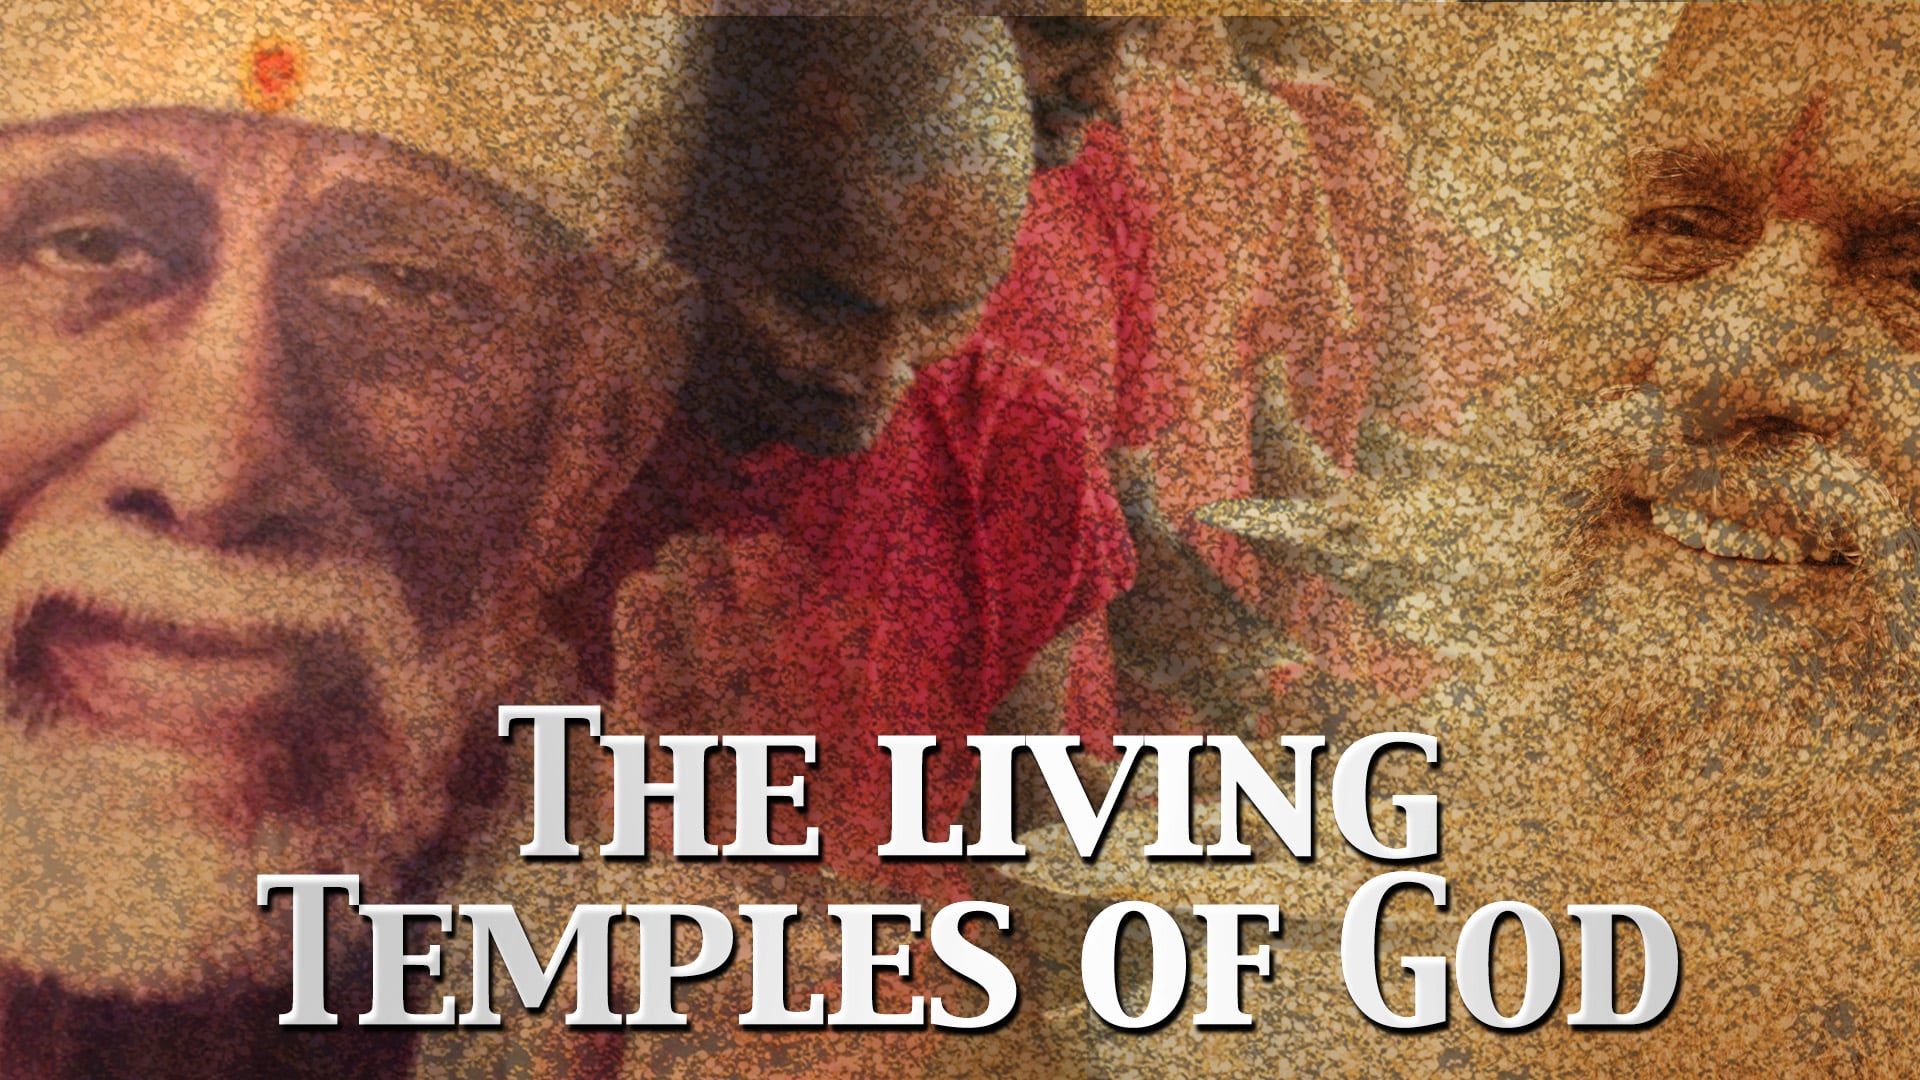 The Living Temples of God